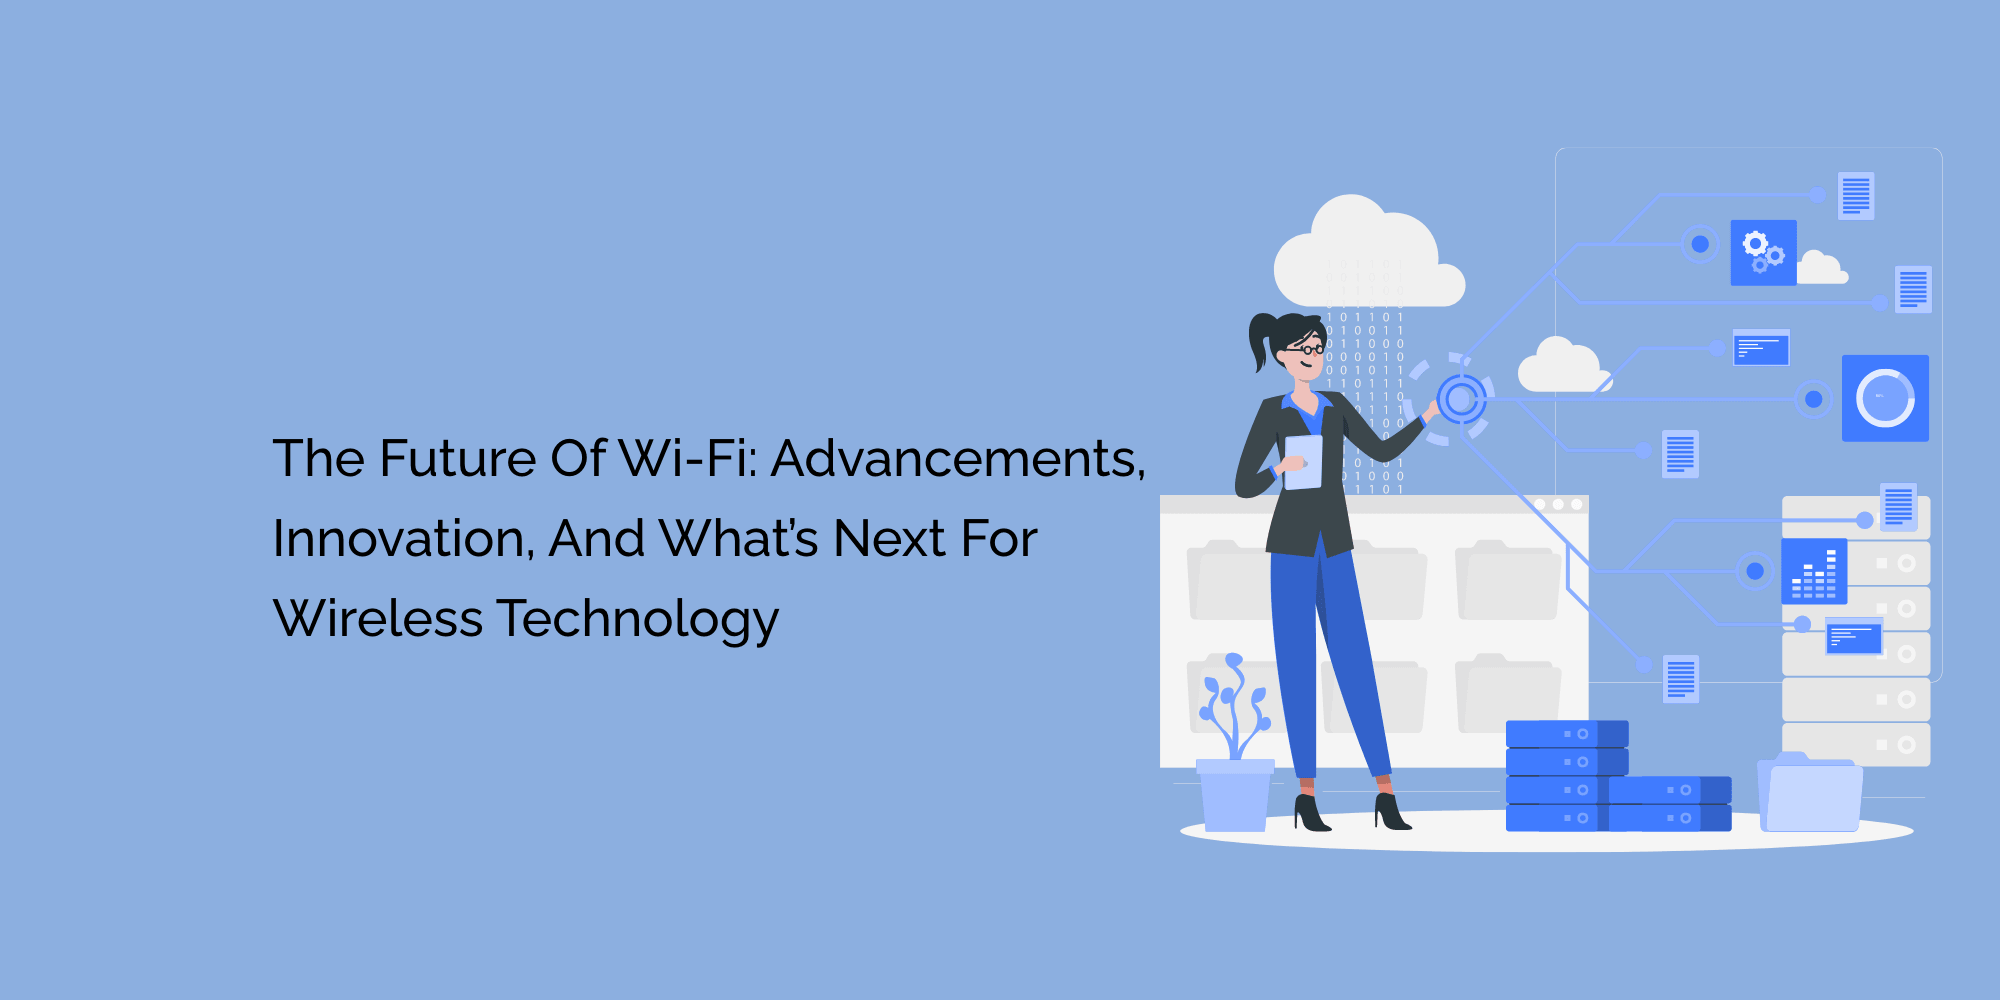 The Future of Wi-Fi: Advancements, Innovation, and What's Next for Wireless Technology